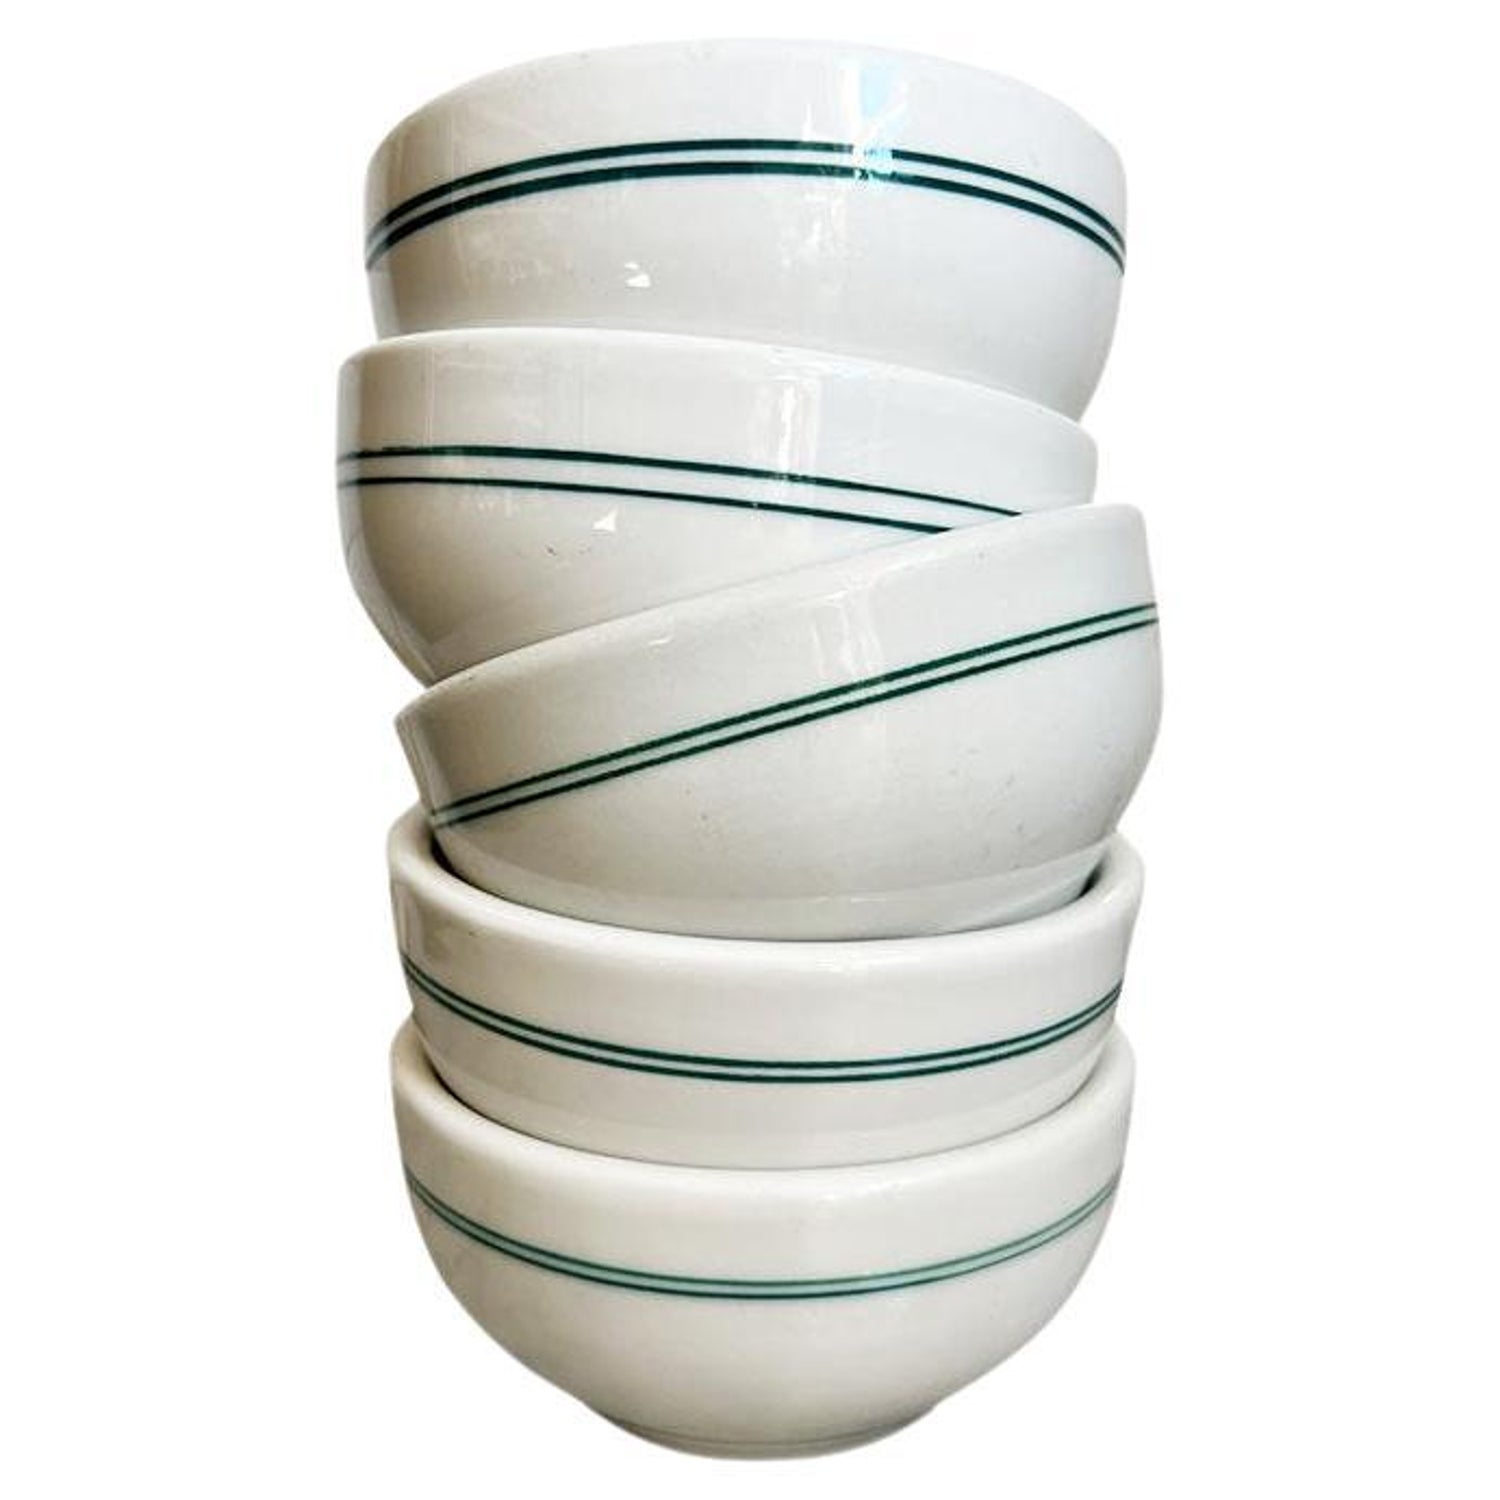 https://a.1stdibscdn.com/mid-century-restaurant-ware-berry-bowls-in-white-and-green-set-of-5-1960s-for-sale/f_33823/f_363427921695766677673/f_36342792_1695766677848_bg_processed.jpg?width=1500